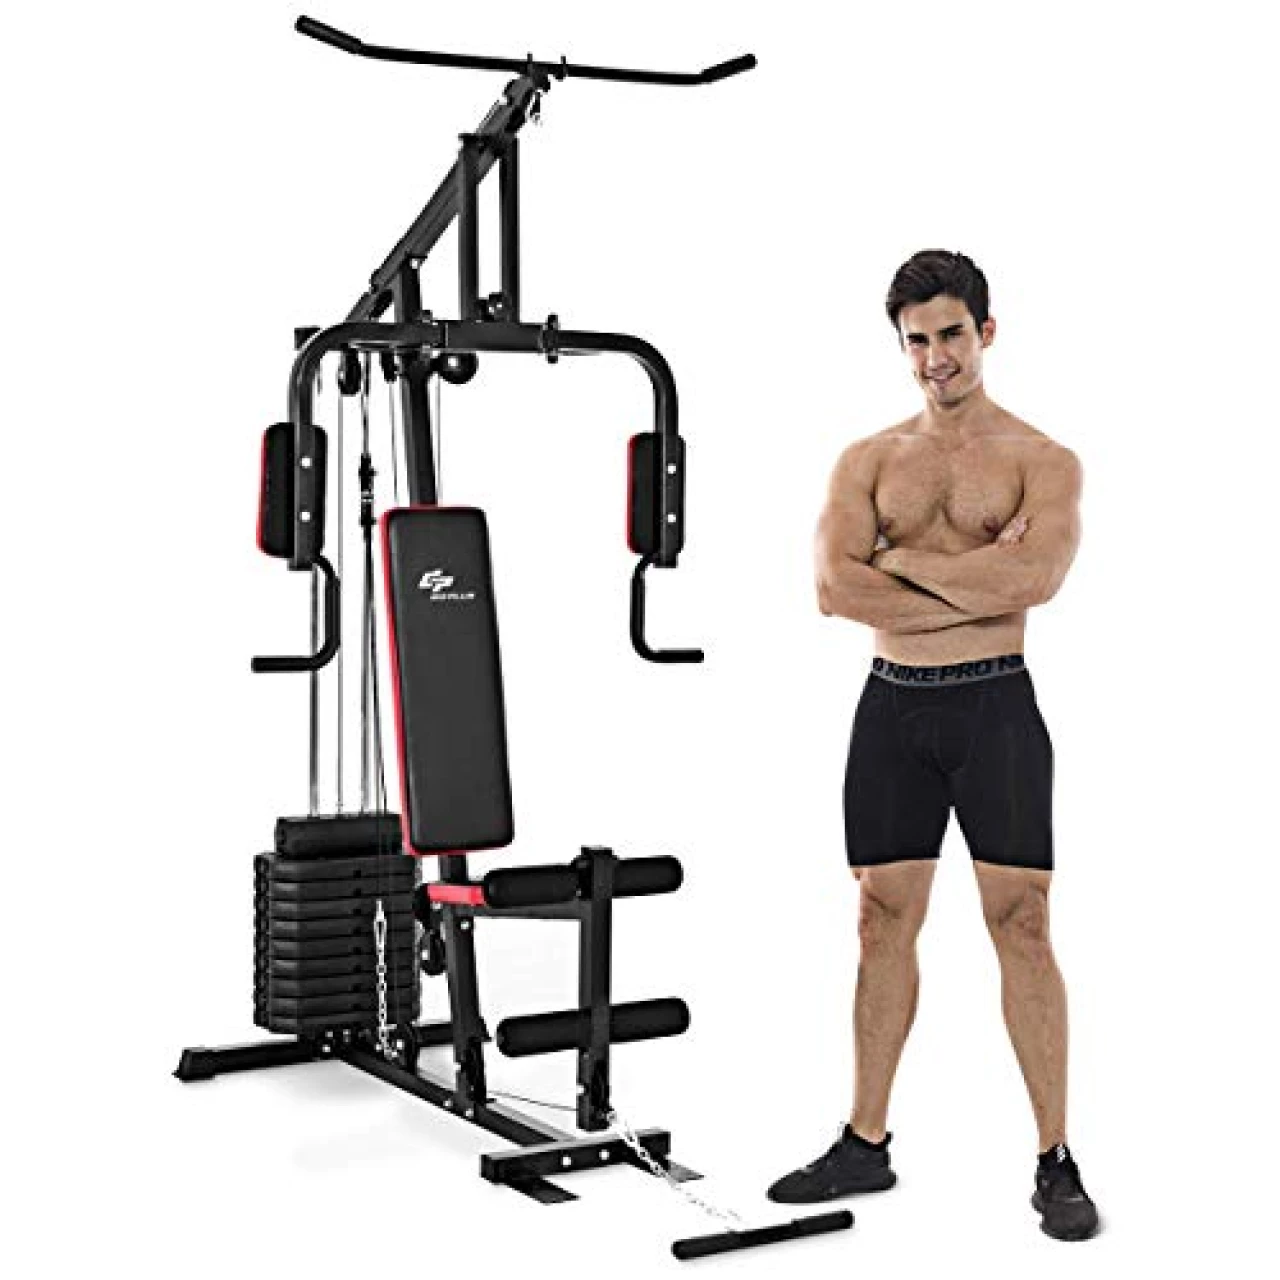 Goplus Multifunction Home Gym System Weight Training Exercise Workout Equipment Fitness Strength Machine